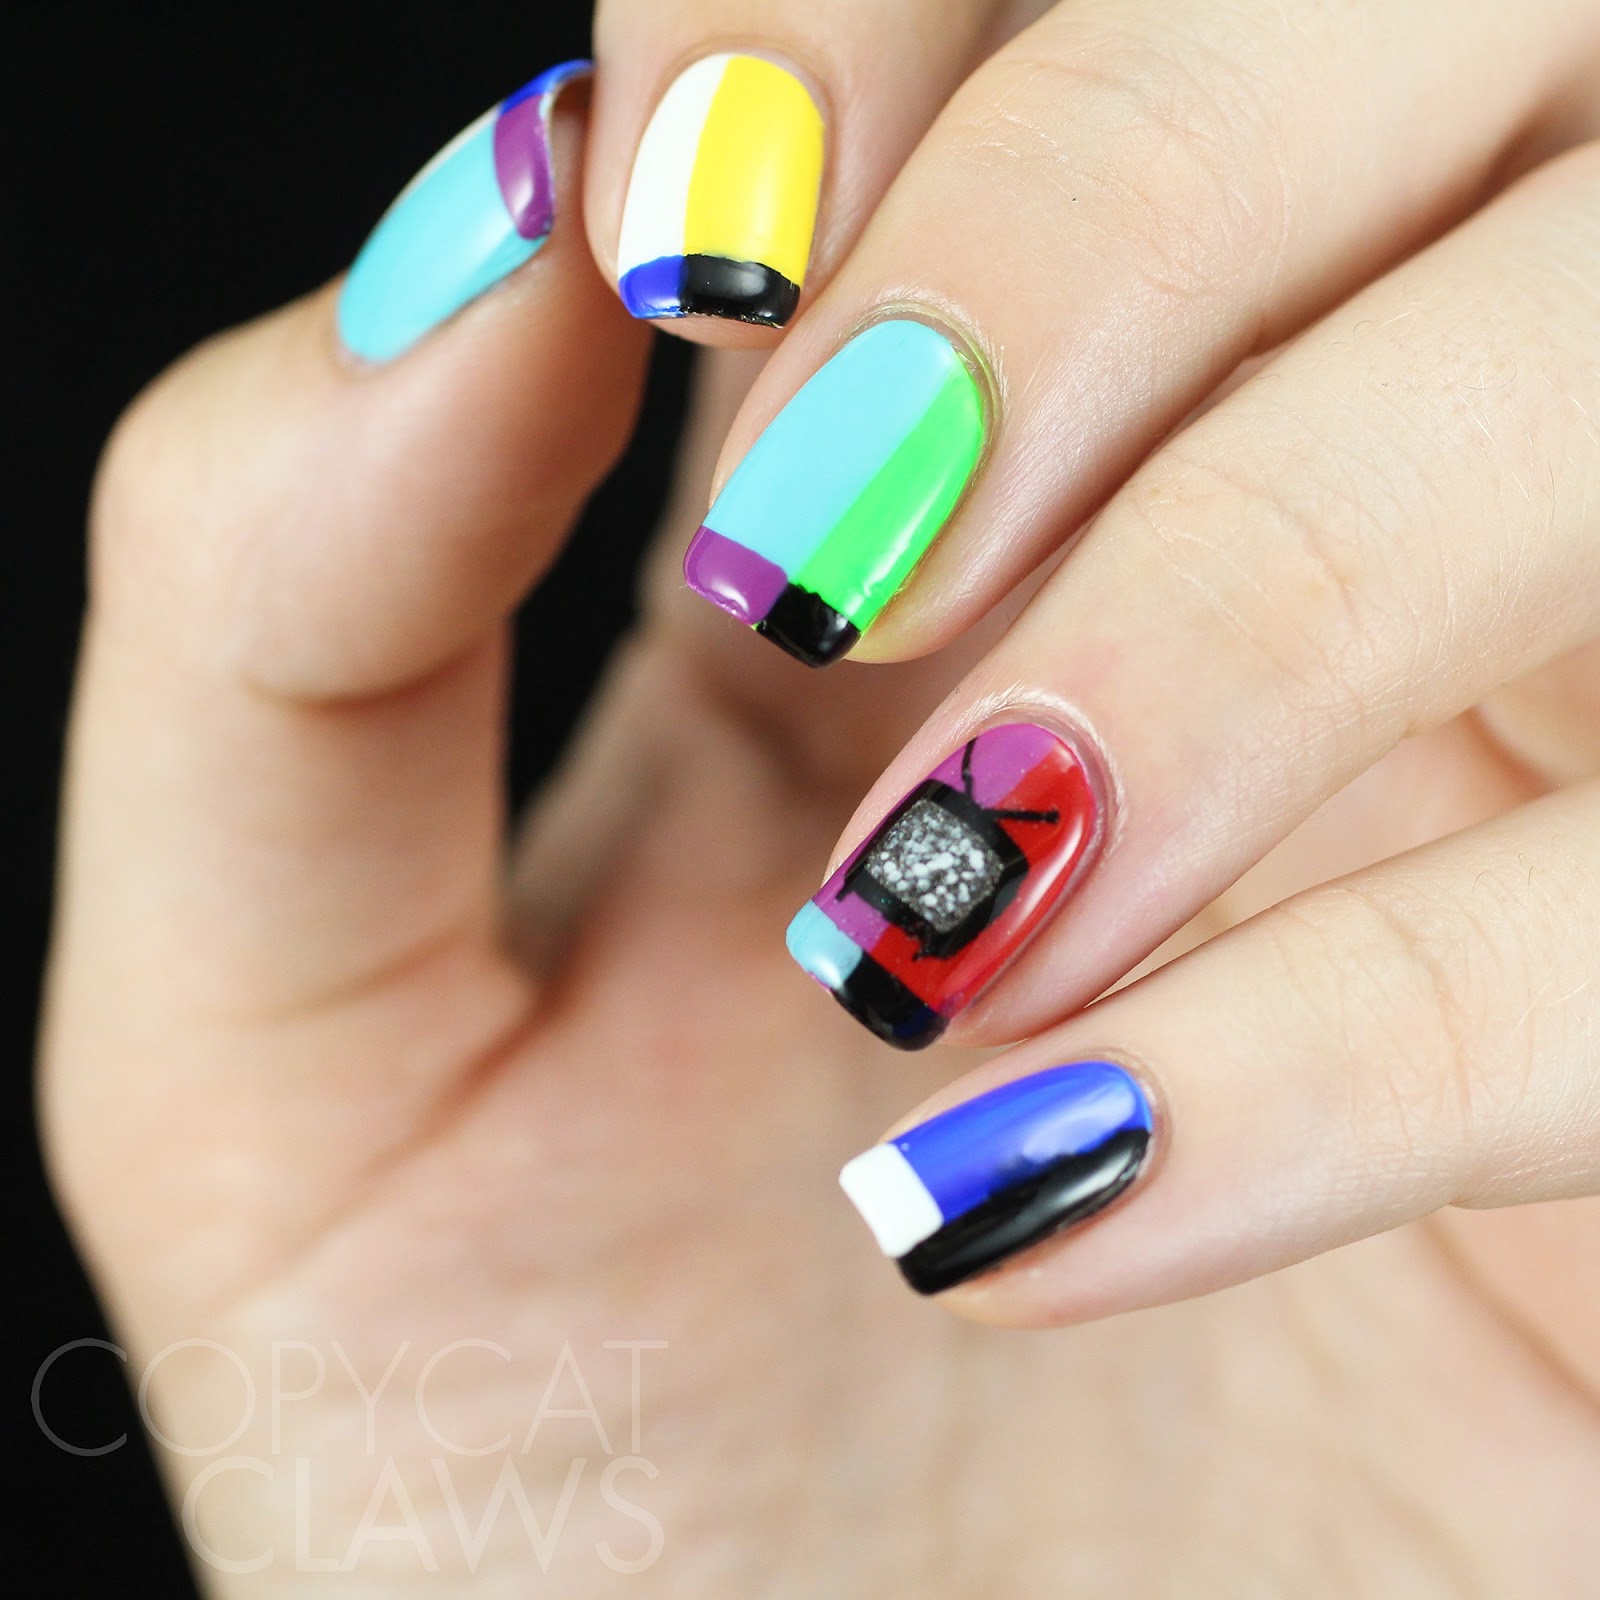 CHANEL NAIL ART STICKERS | innovanails